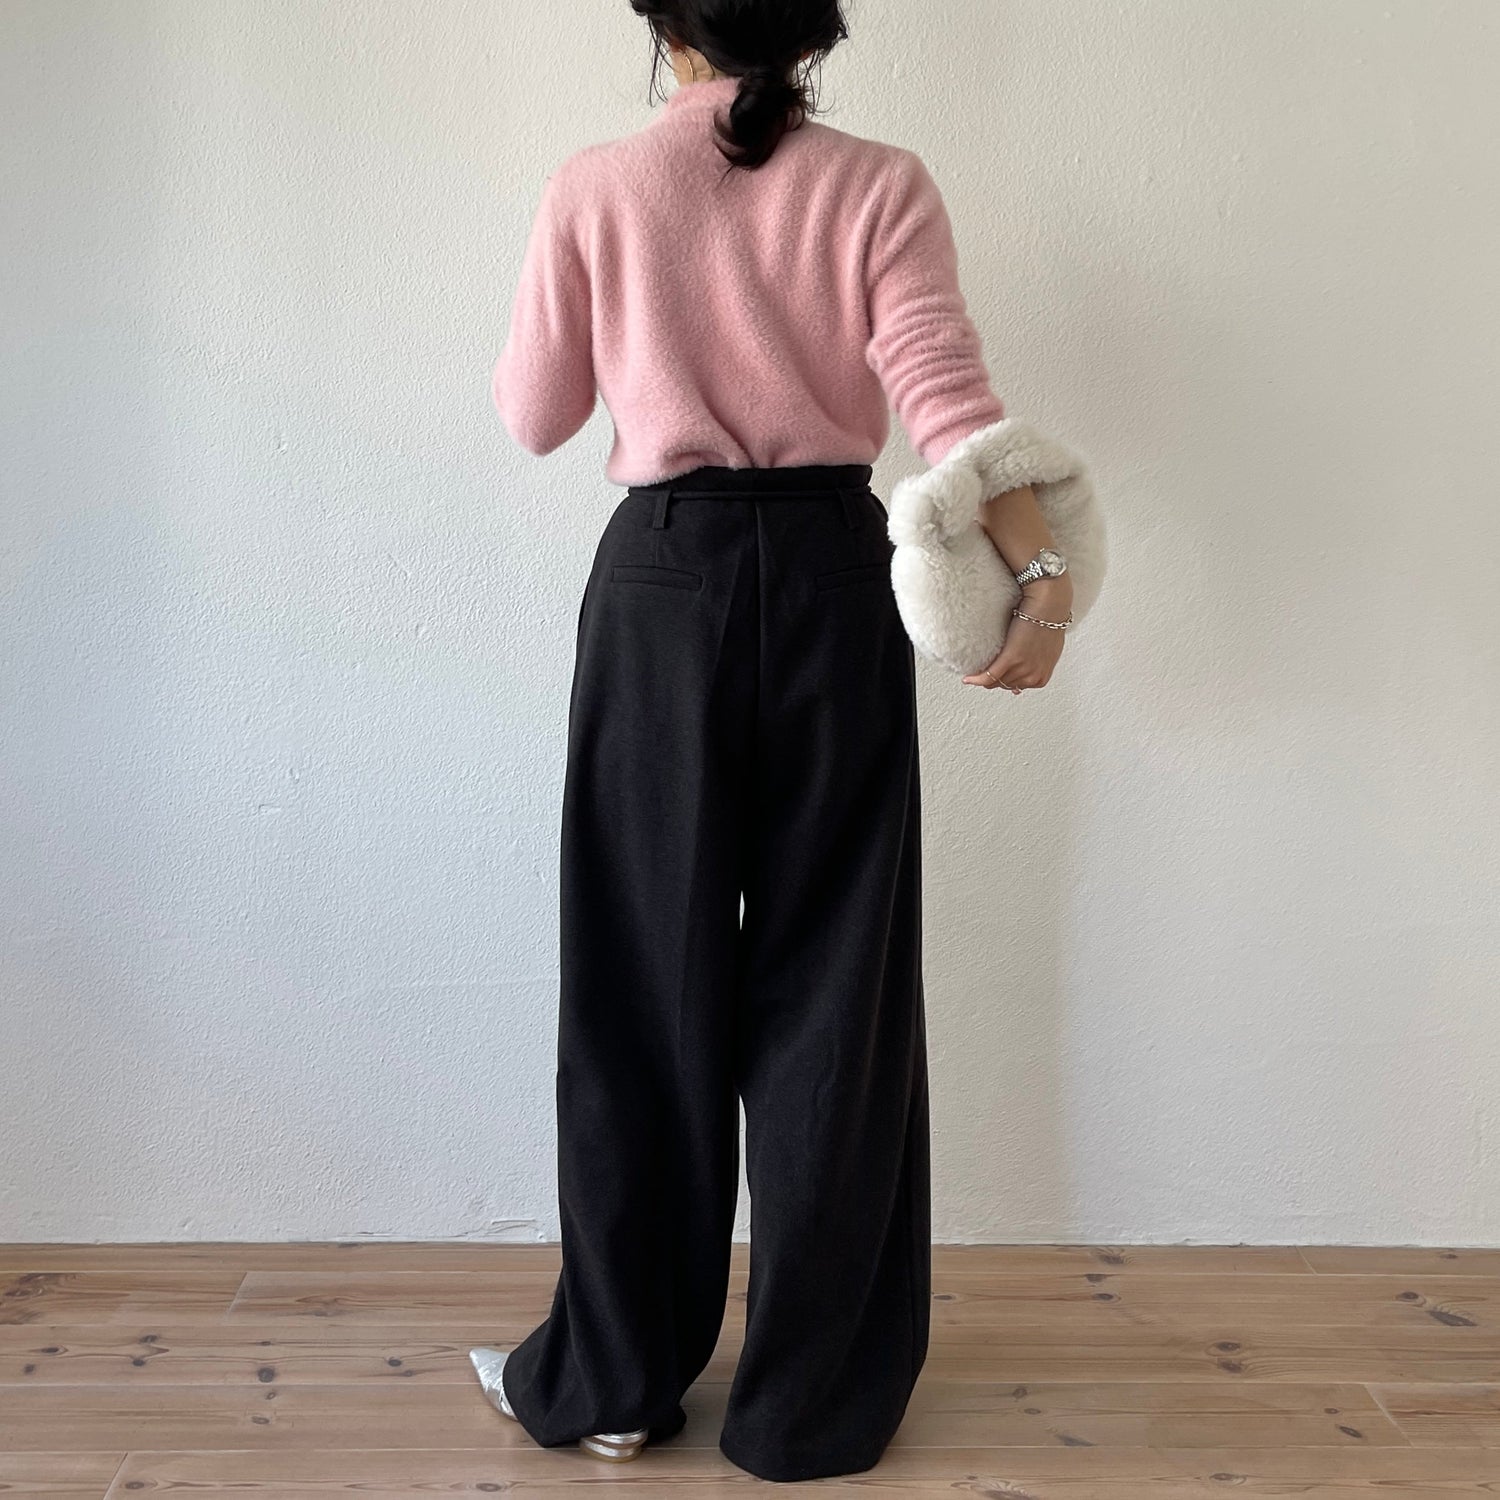 【SAMPLE】petit high neck compact shaggy knit / pink